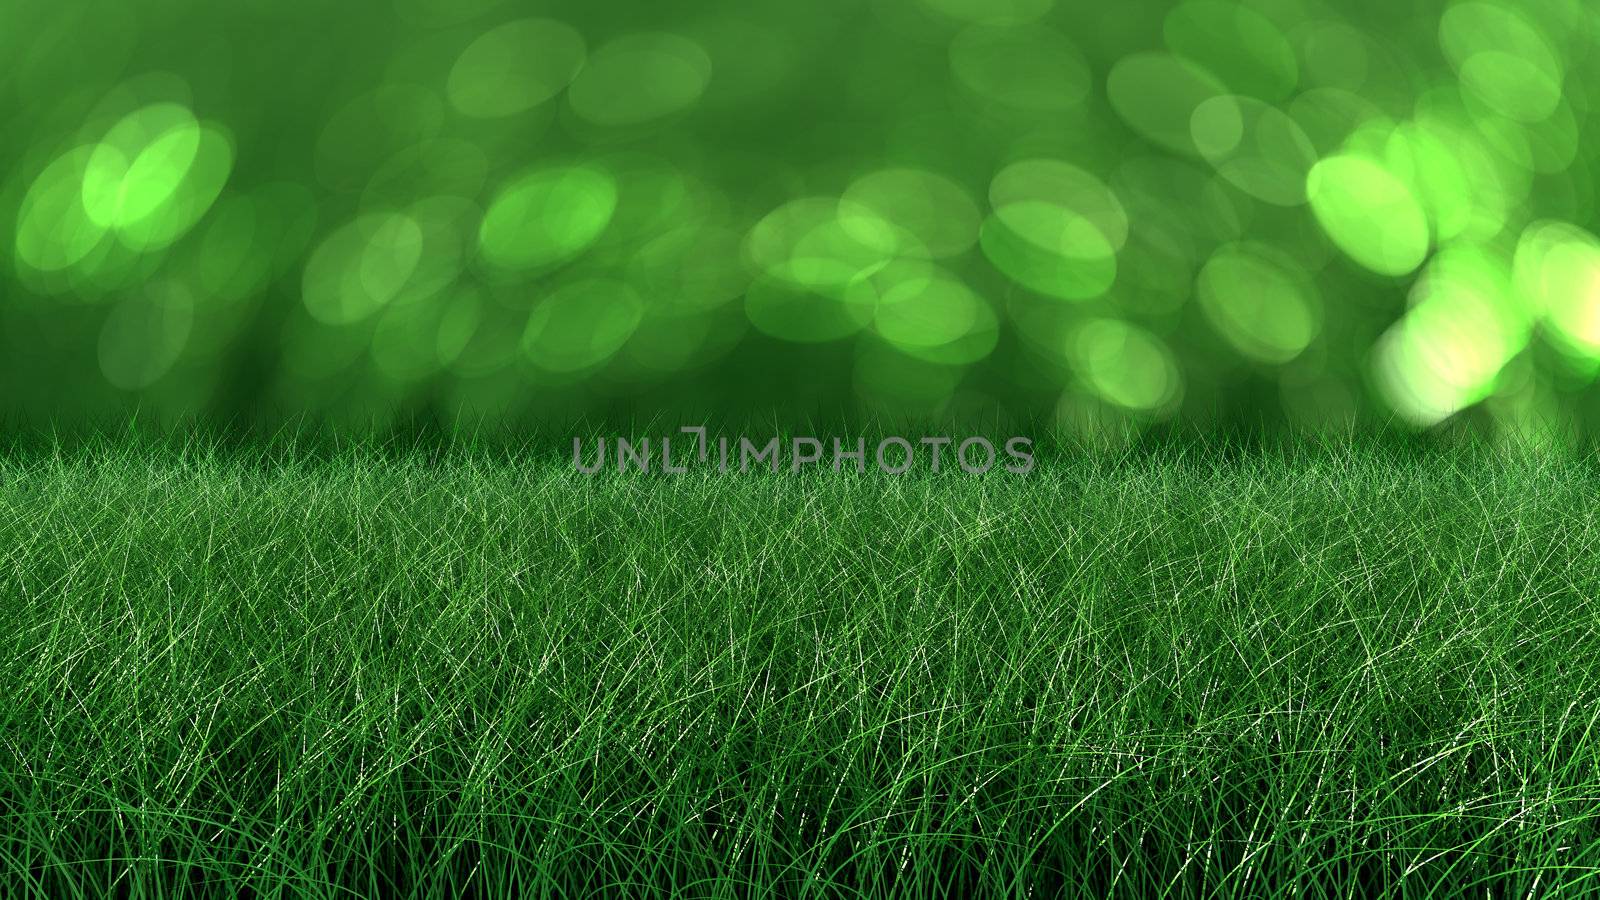 flowers and grass tilling texture for backgrounds by denisgo